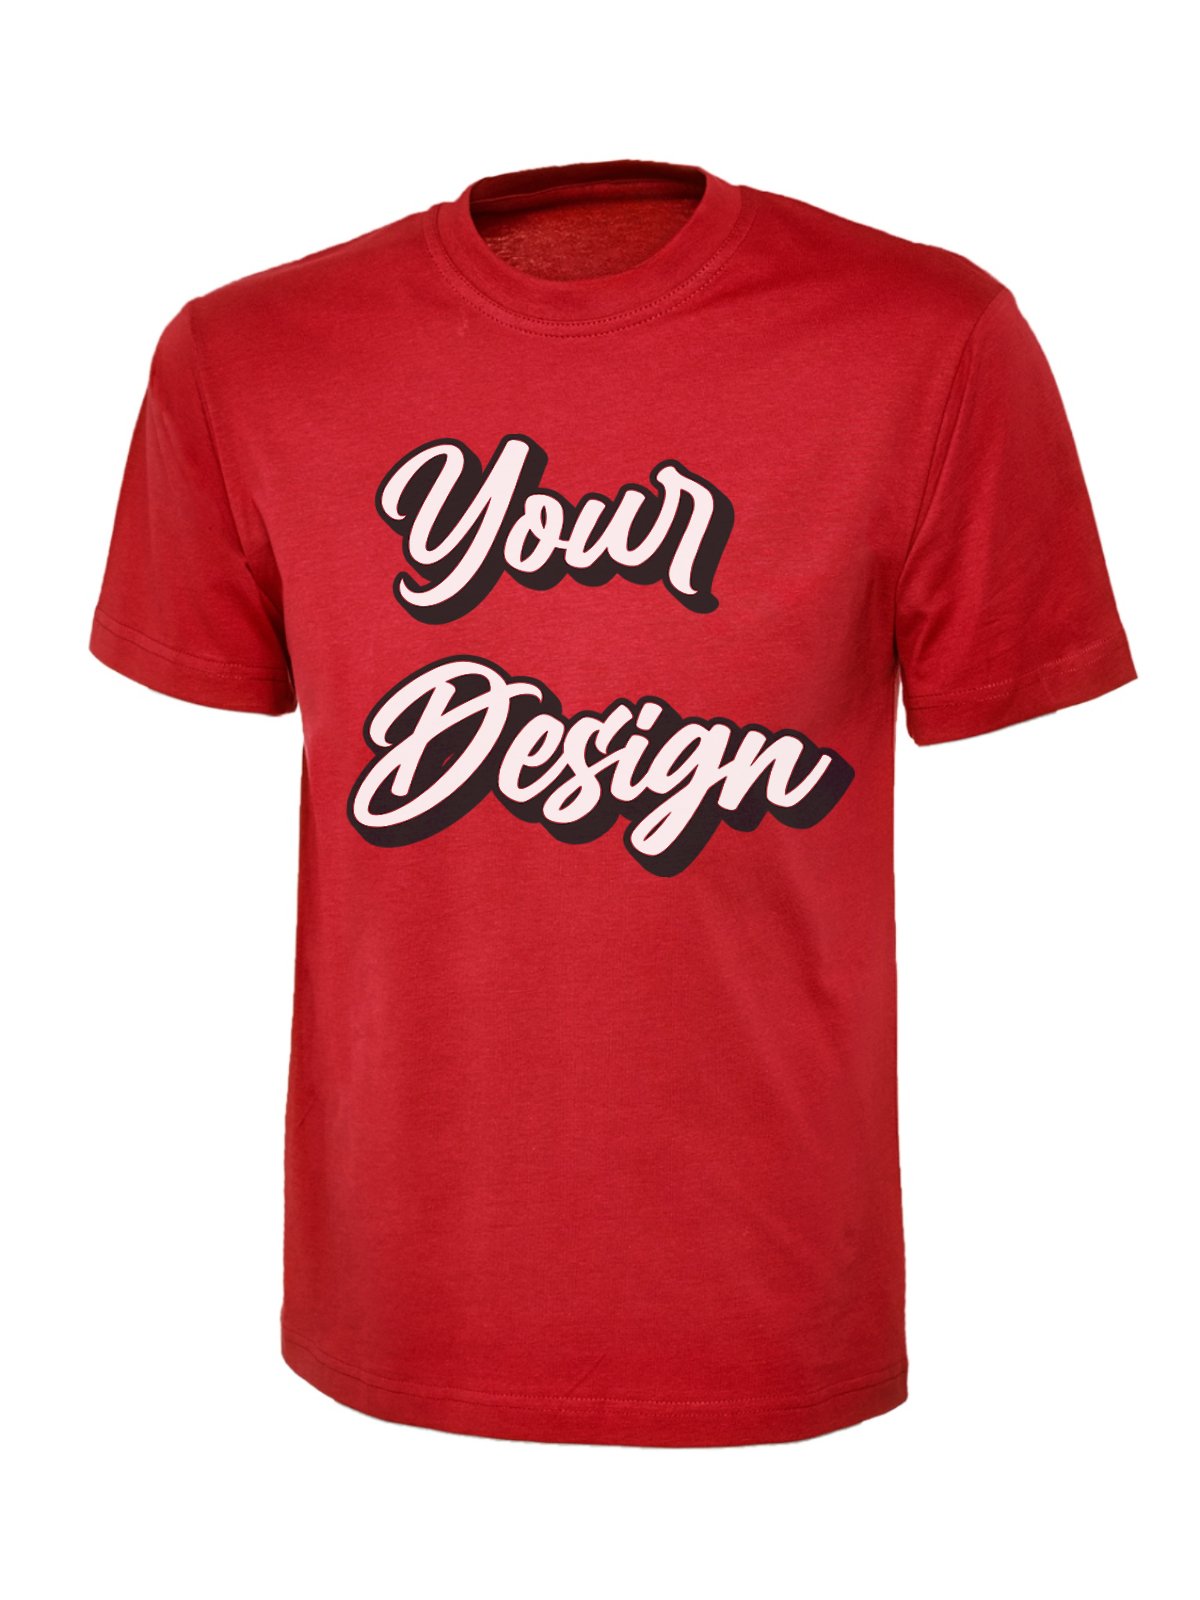 Design Your Own T-Shirt - Wow T-Shirts